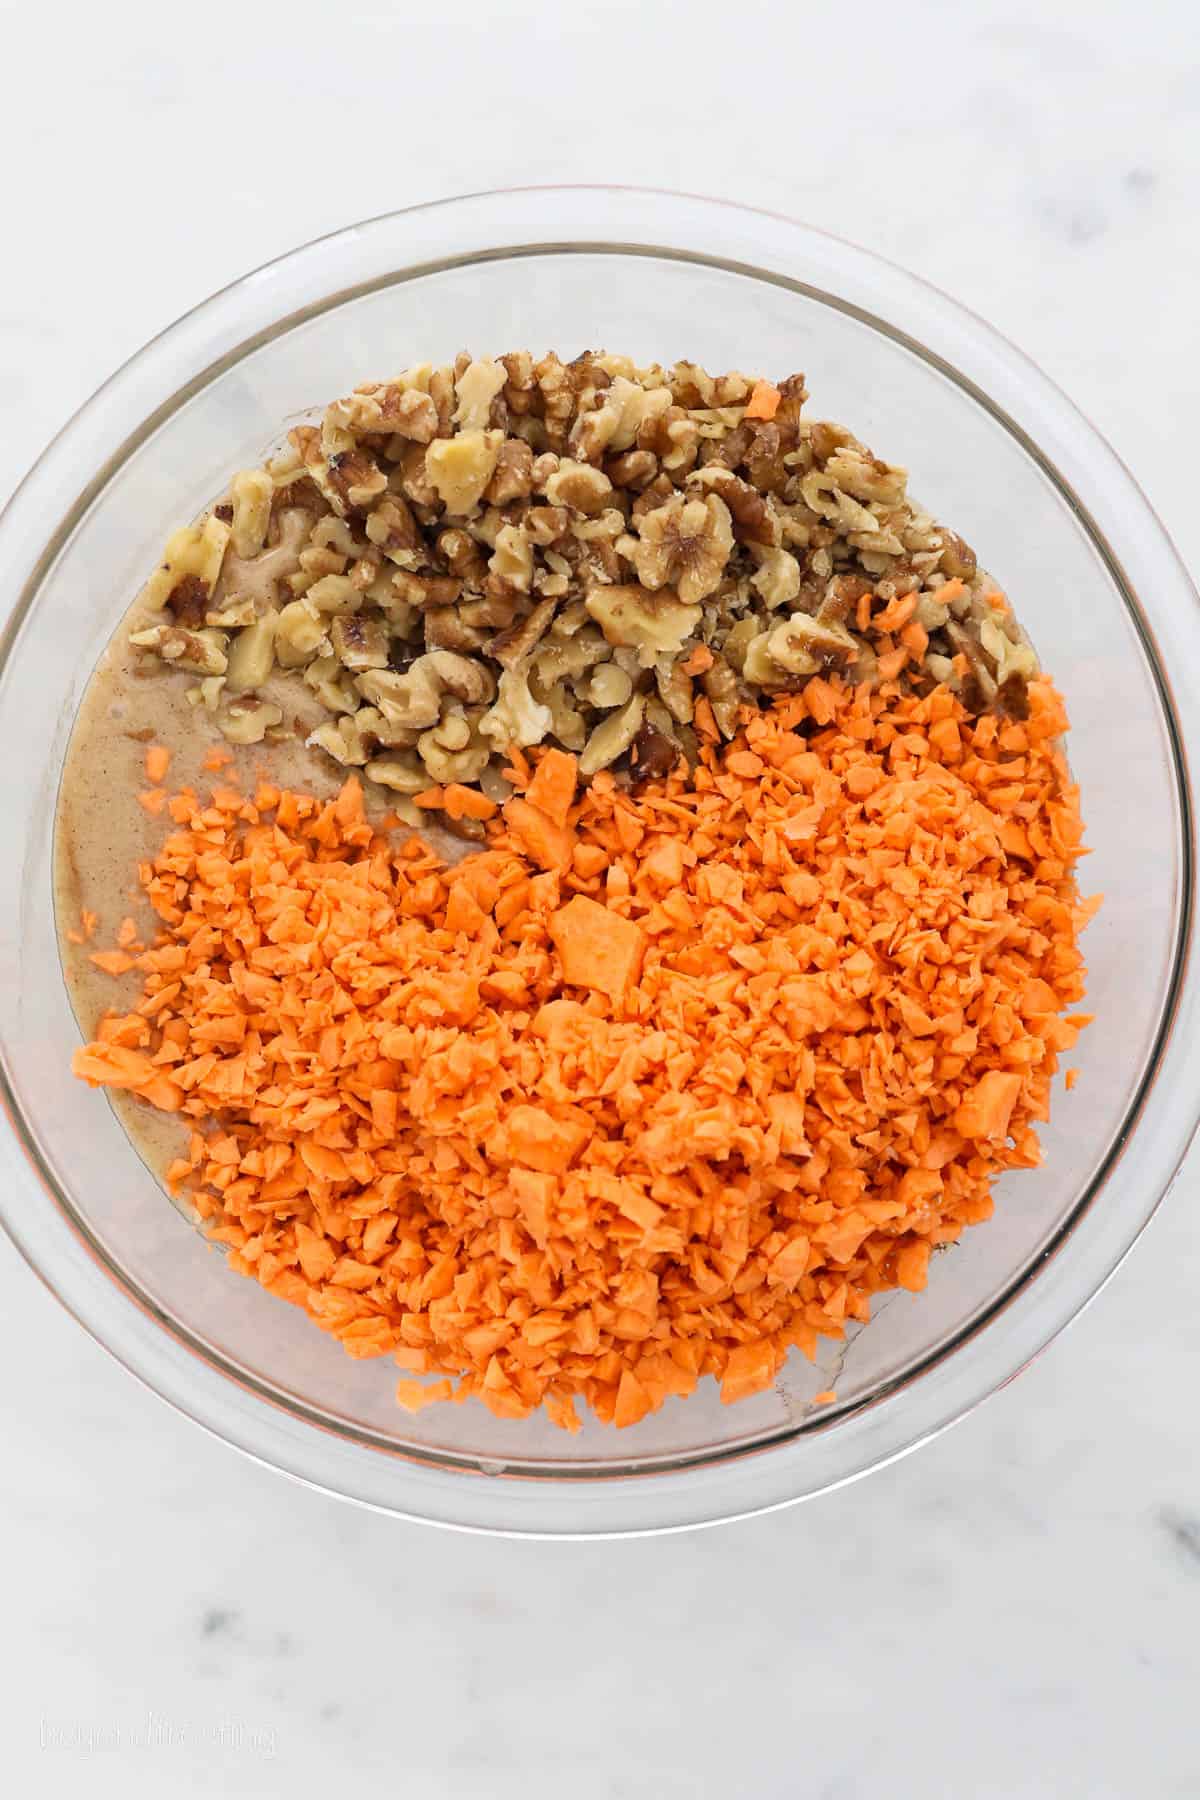 Shredded sweet potato and chopped walnuts added to sweet potato cake batter in a glass mixing bowl.